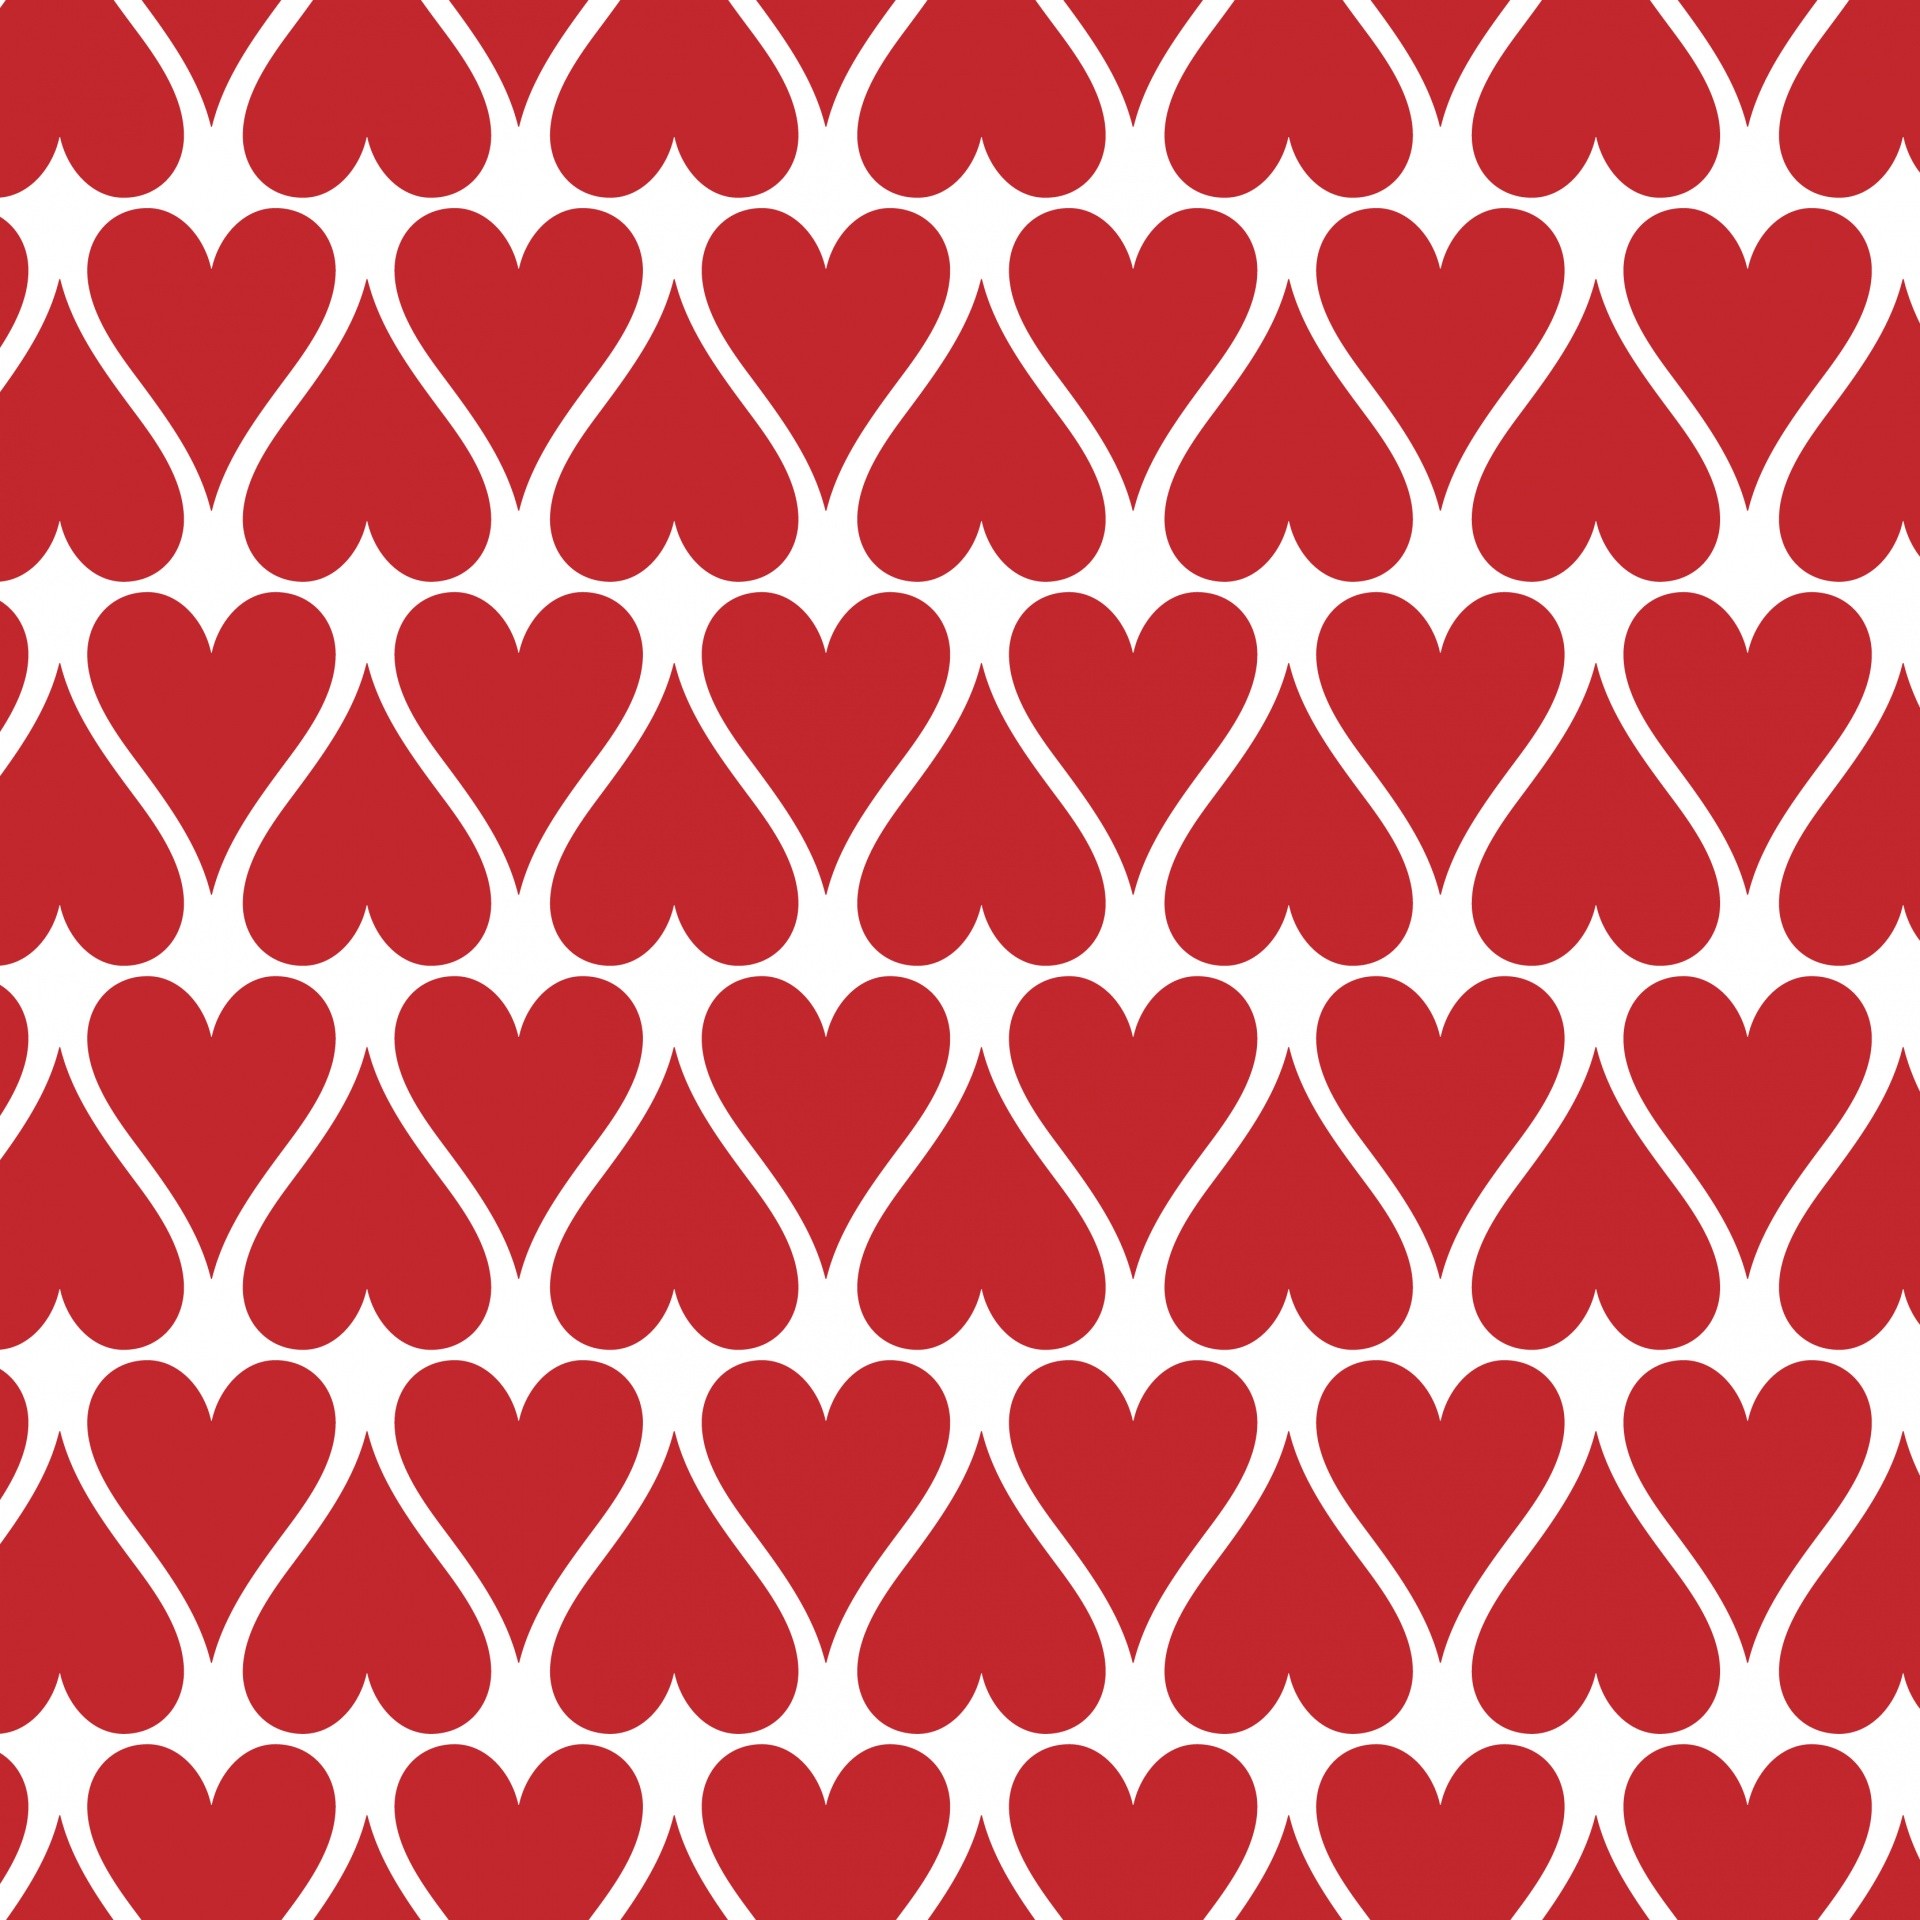 1920x1920 Red Hearts Wallpaper Background ...